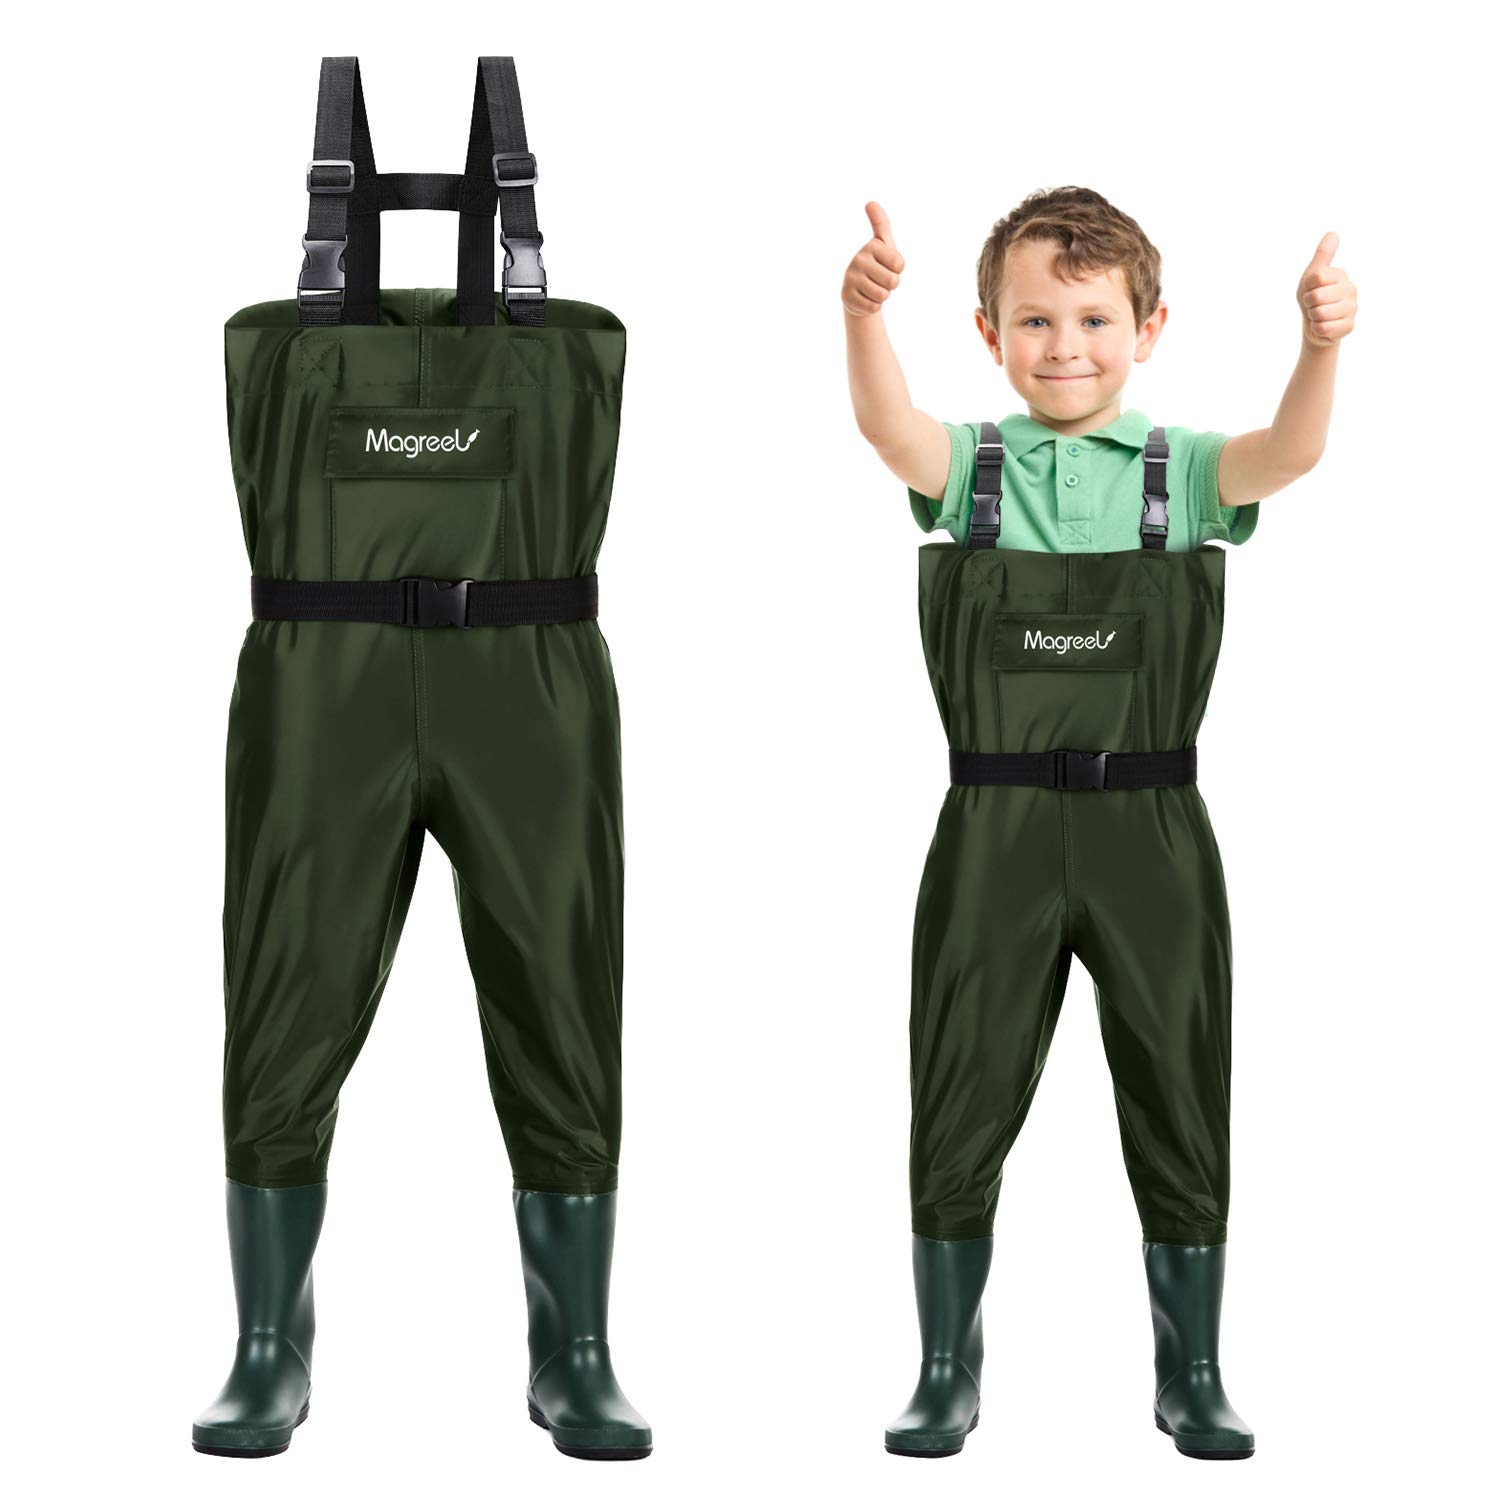  HISEA Kids Chest Waders Nylon/PVC Youth Fishing Waders for  Toddler & Children Waterproof Hunting Waders with Boots & Reflect Safety  Band : Sports & Outdoors